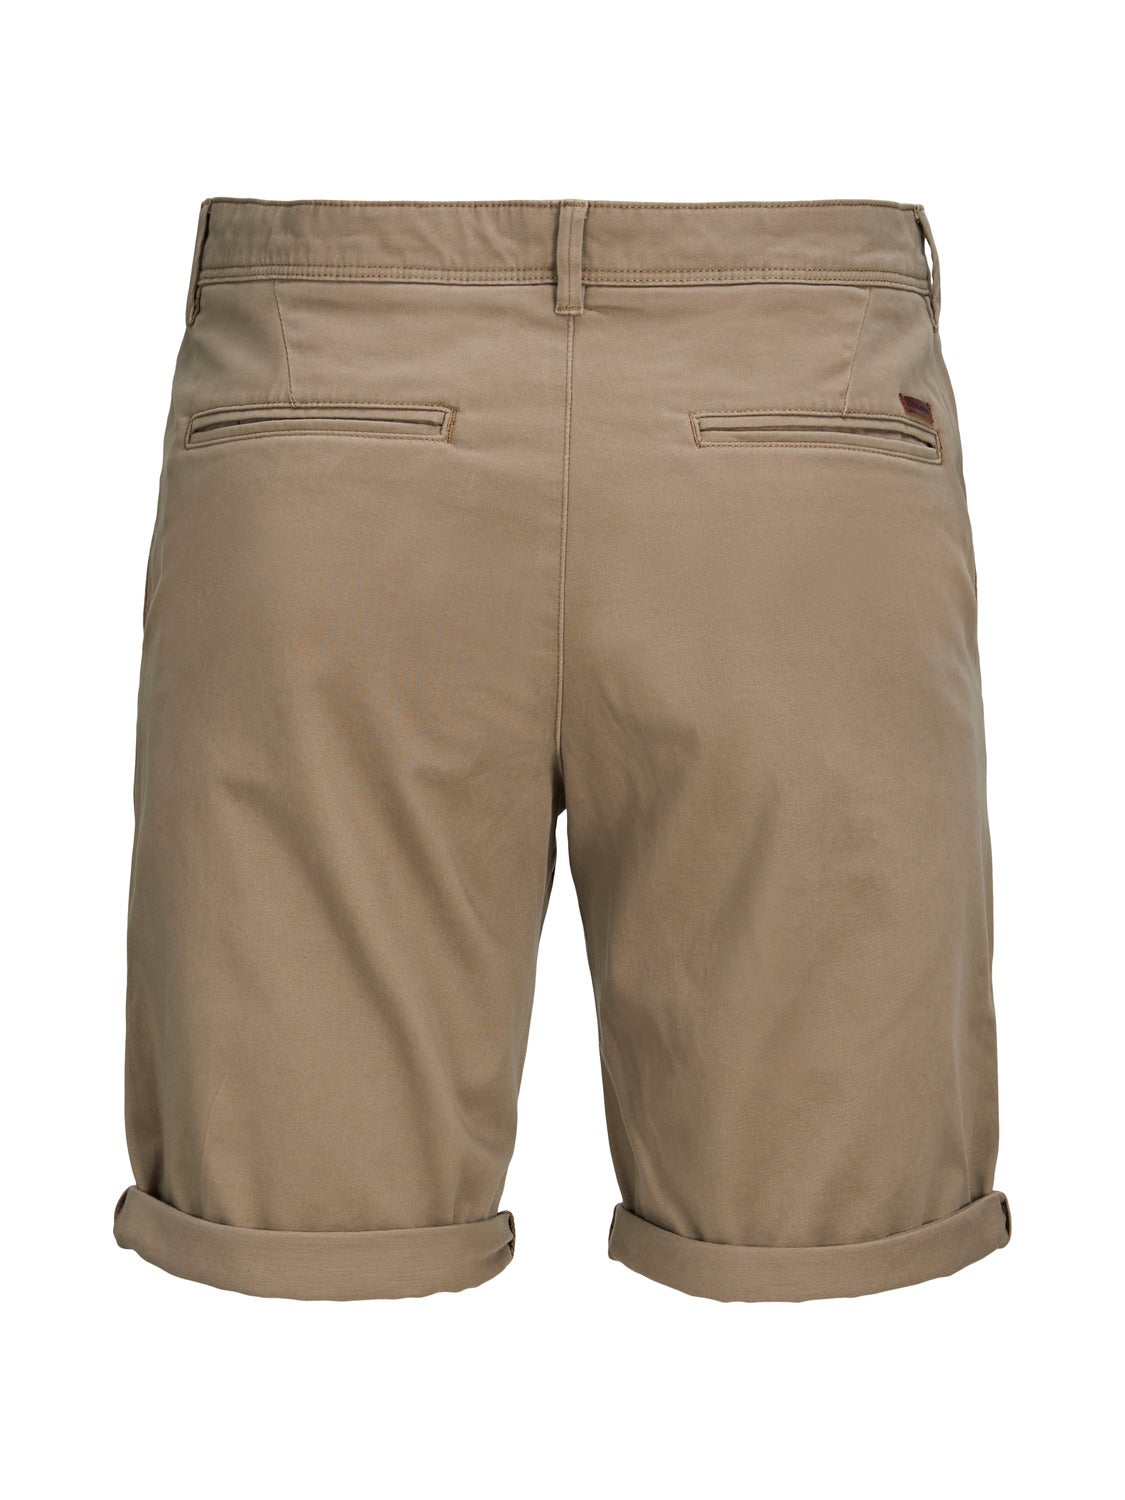 Slim Fit Chino shorts with 30% discount! | Jack & Jones®